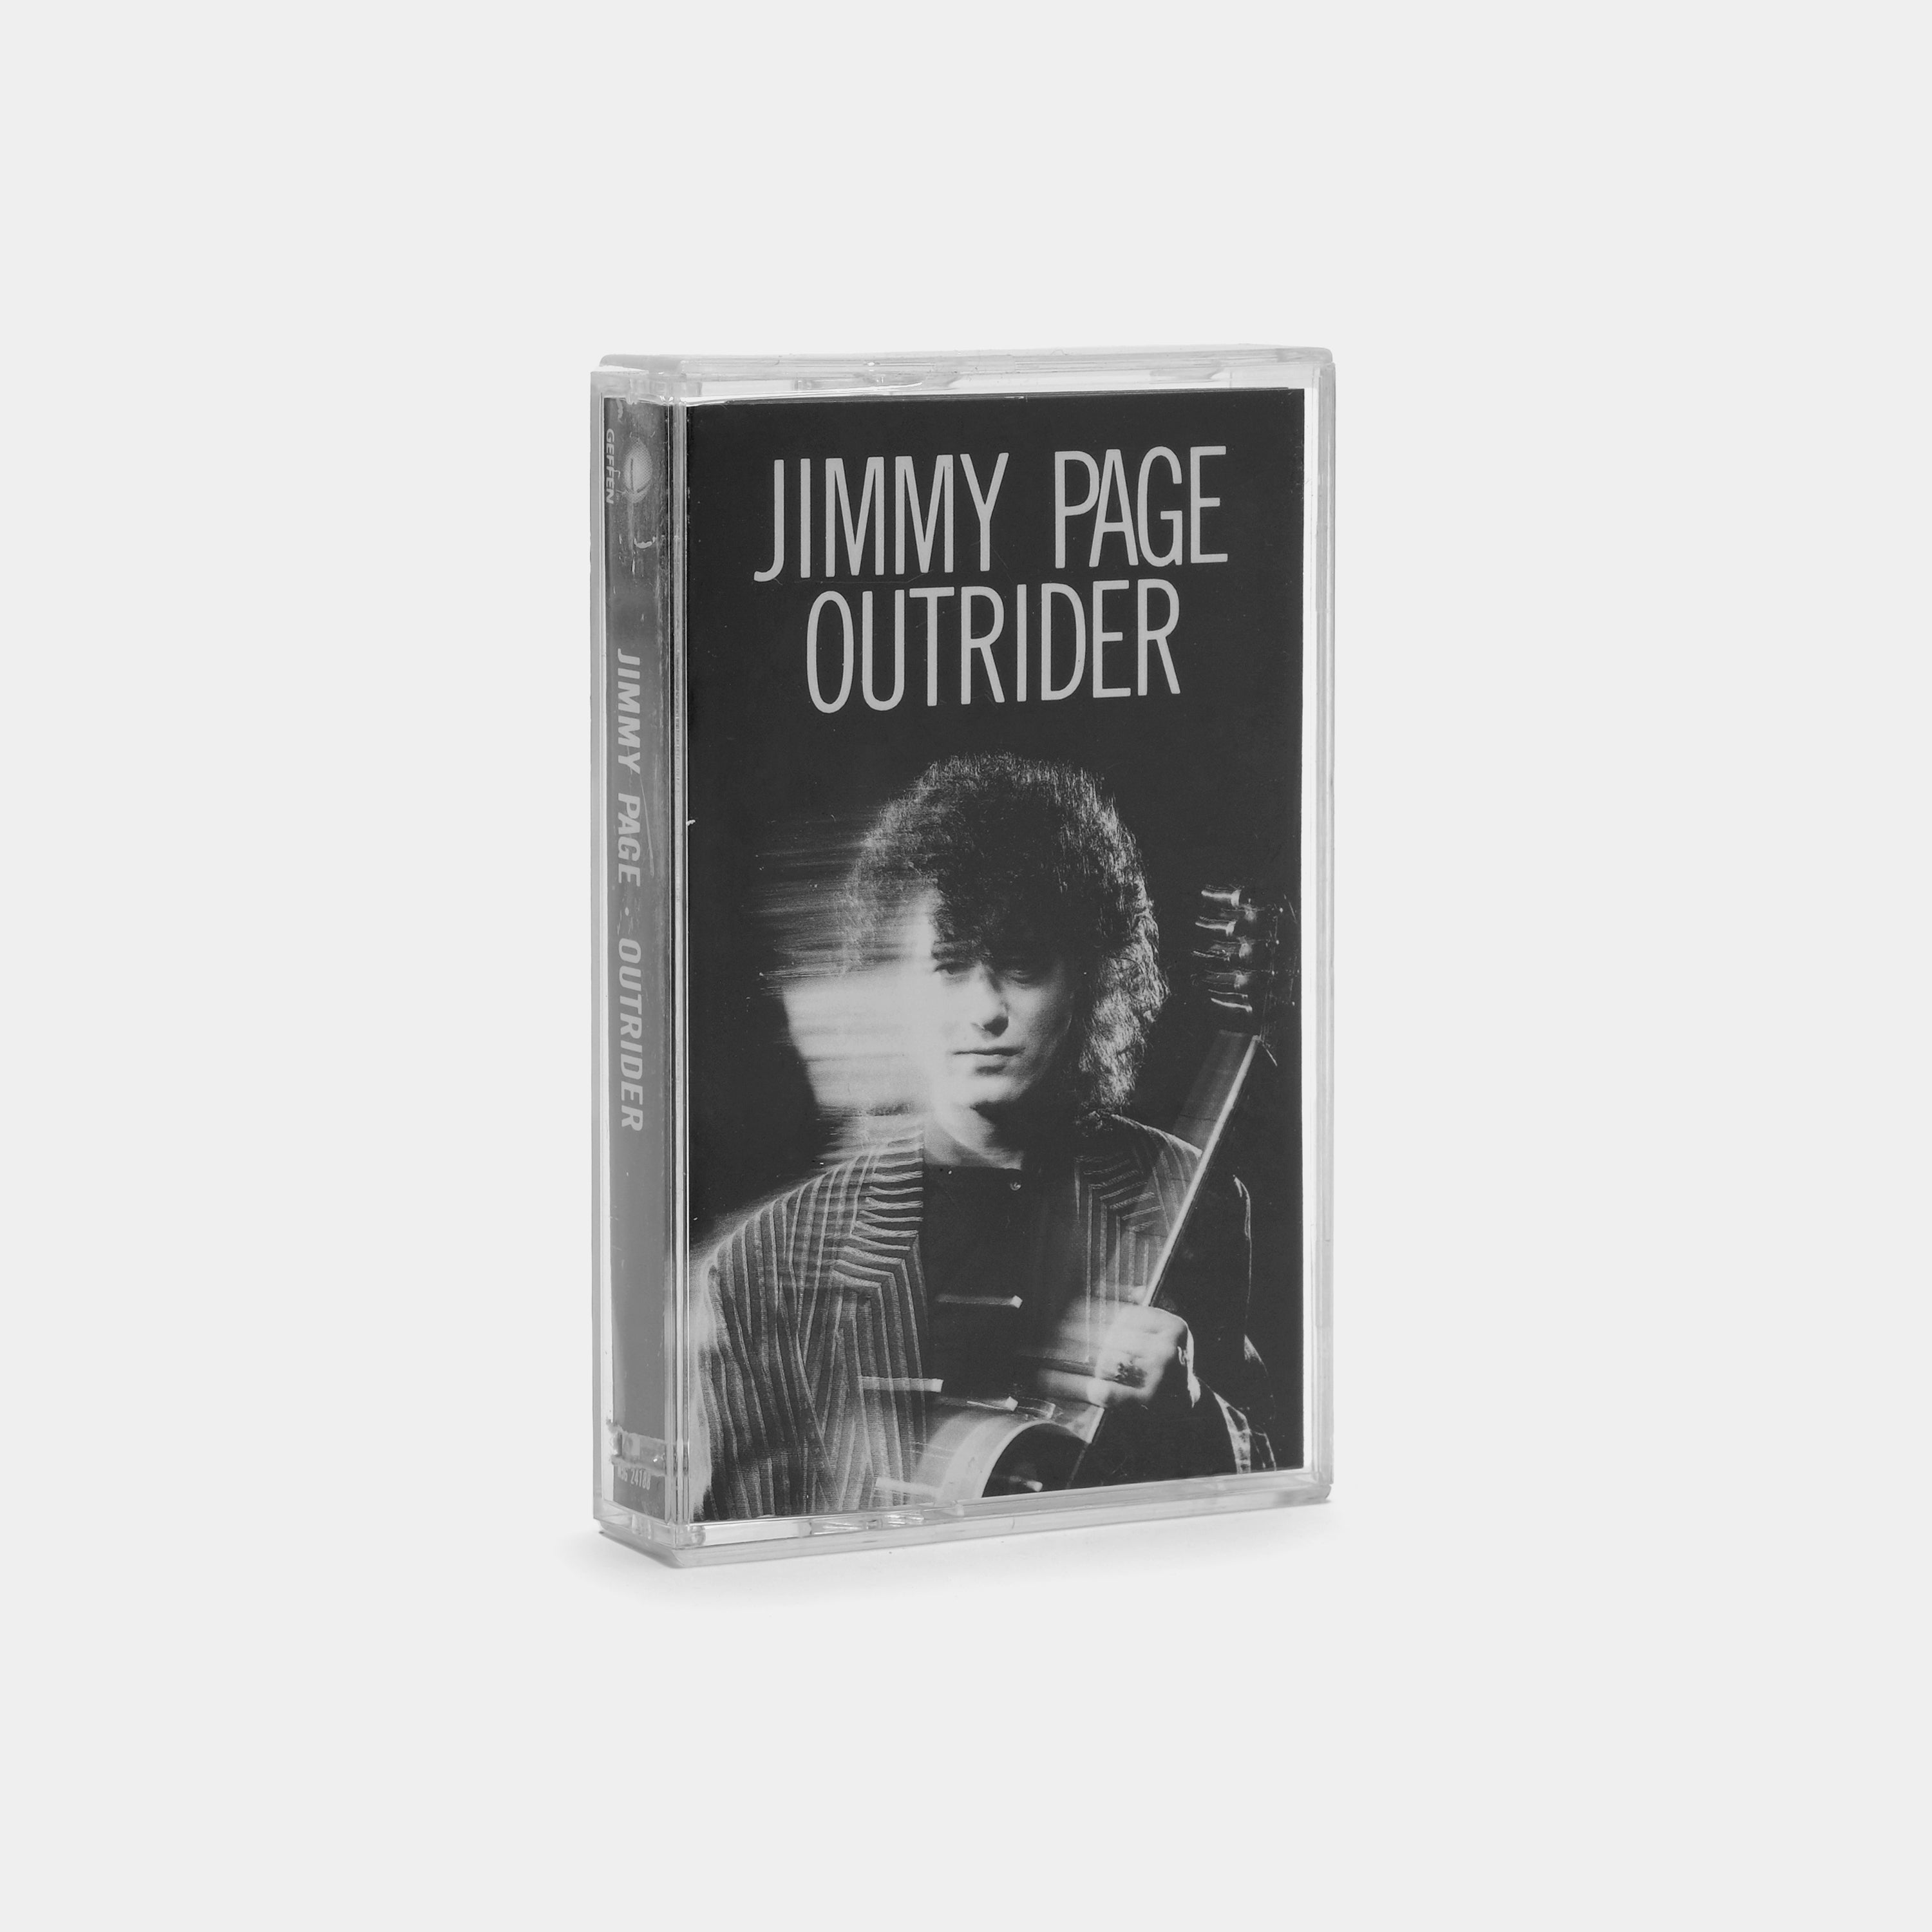 Jimmy Page - Outrider Cassette Tape